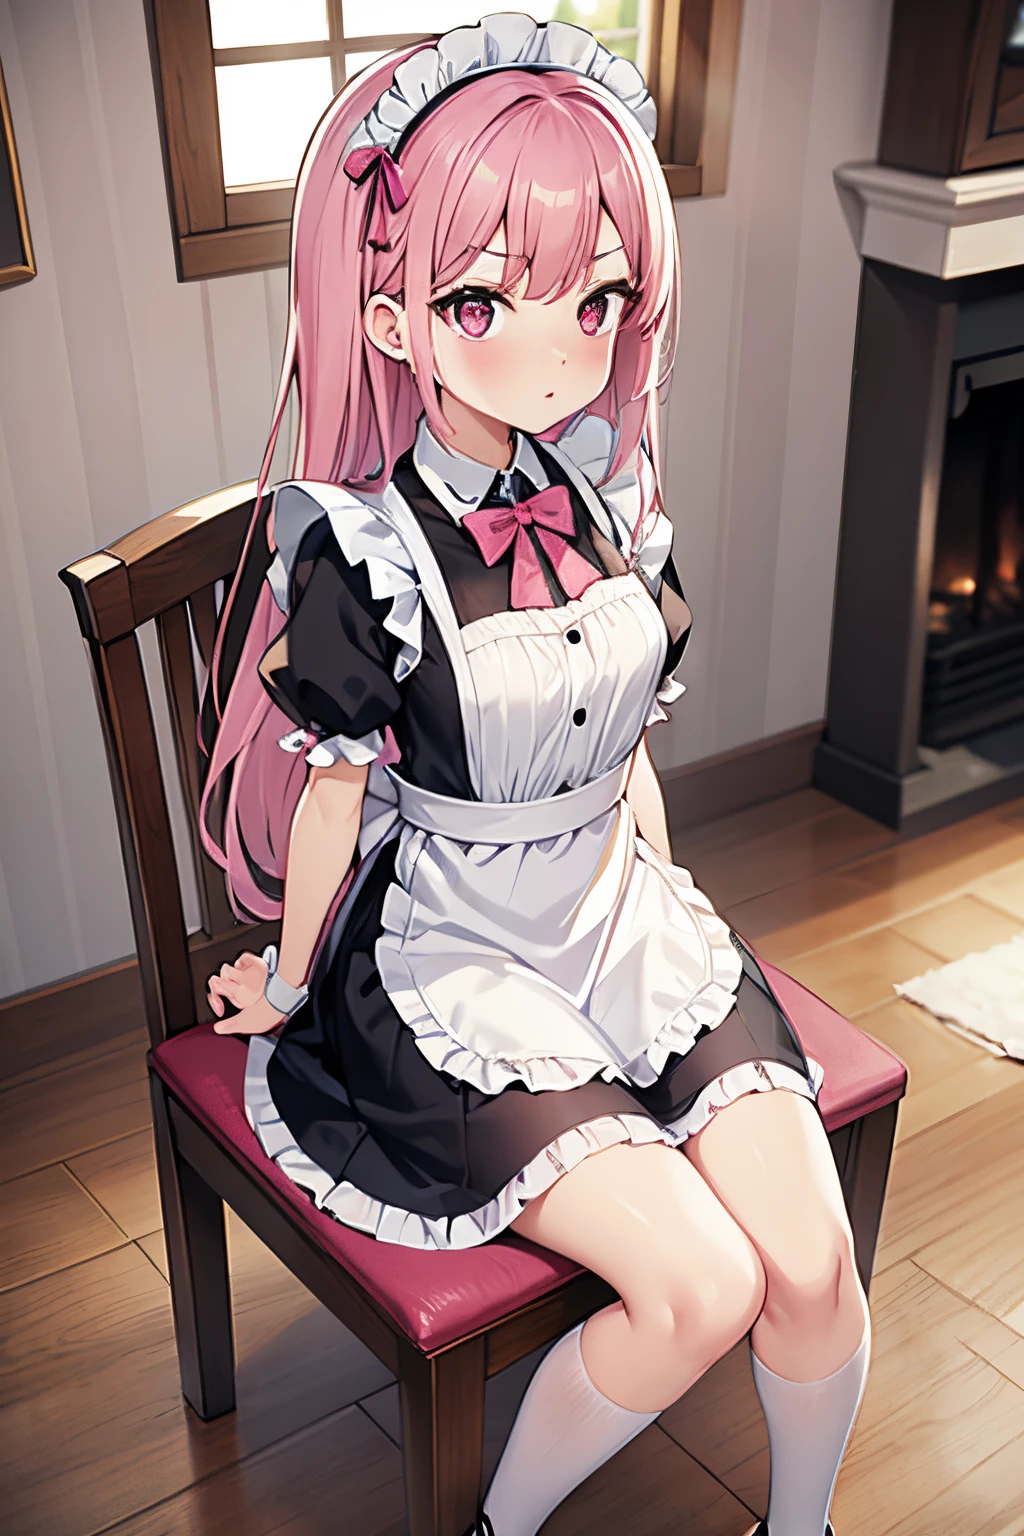 Girl with long pink hair, pink eyes, wearing a maid outfit , sitting on a wooden chair, hands not visible , medieval stone walls, there is a fireplace, broken windows with a chaotic sky